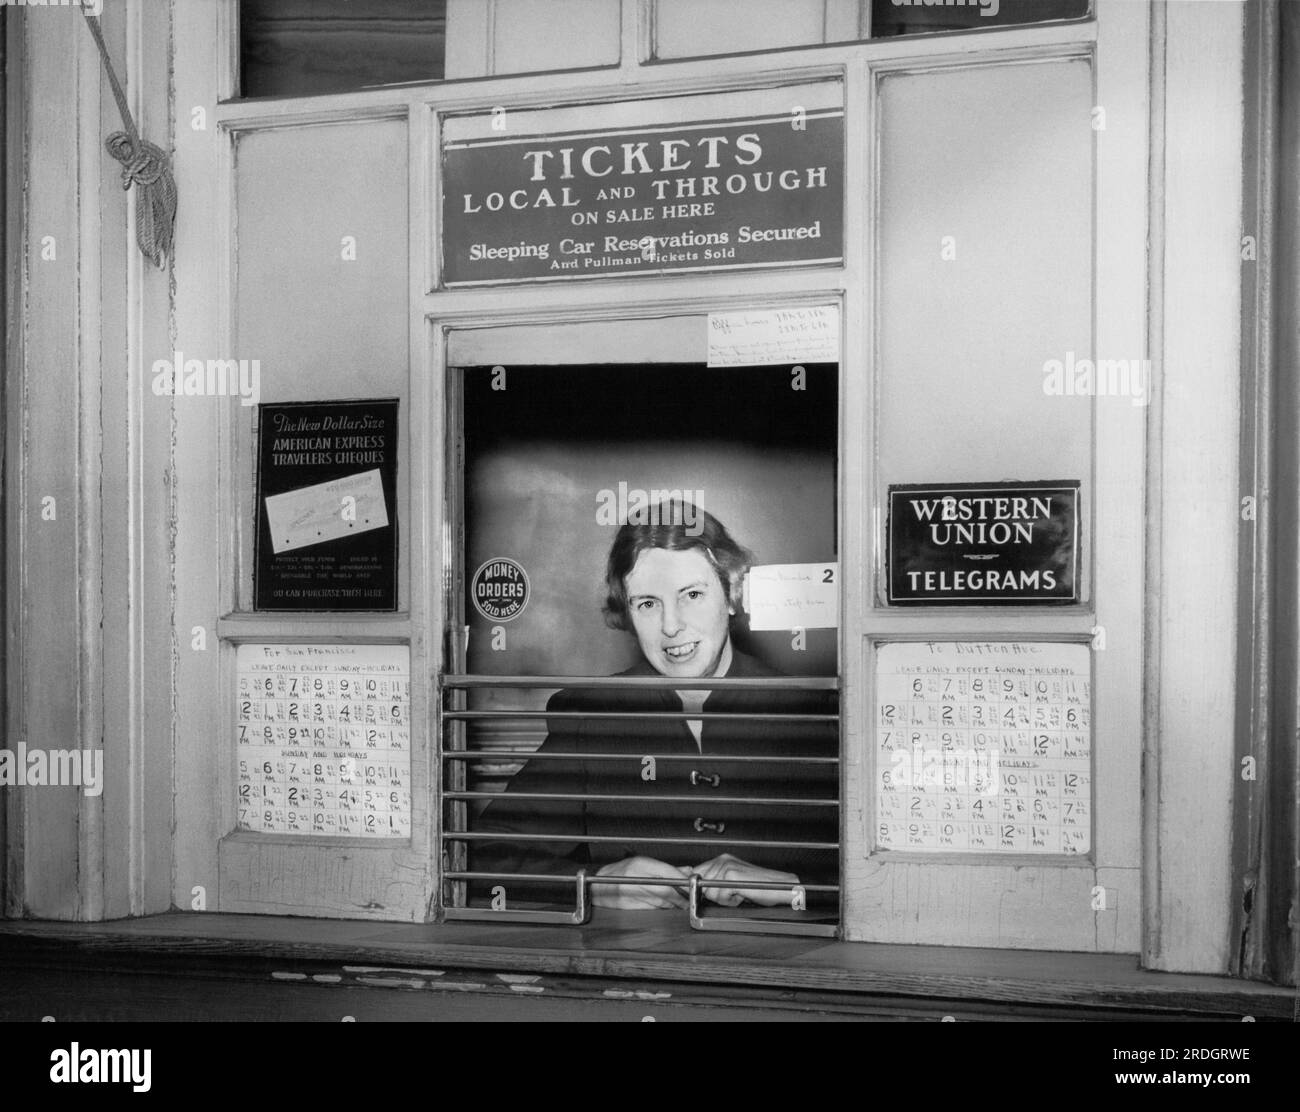 Oakland, California:  c. 1946 A woman at at a railroad ticket counter selling tickets to San Francisco and Dutton Avenue in San Leandro, along with American Express Traveler's Cheques and Western Union telegrams. Stock Photo